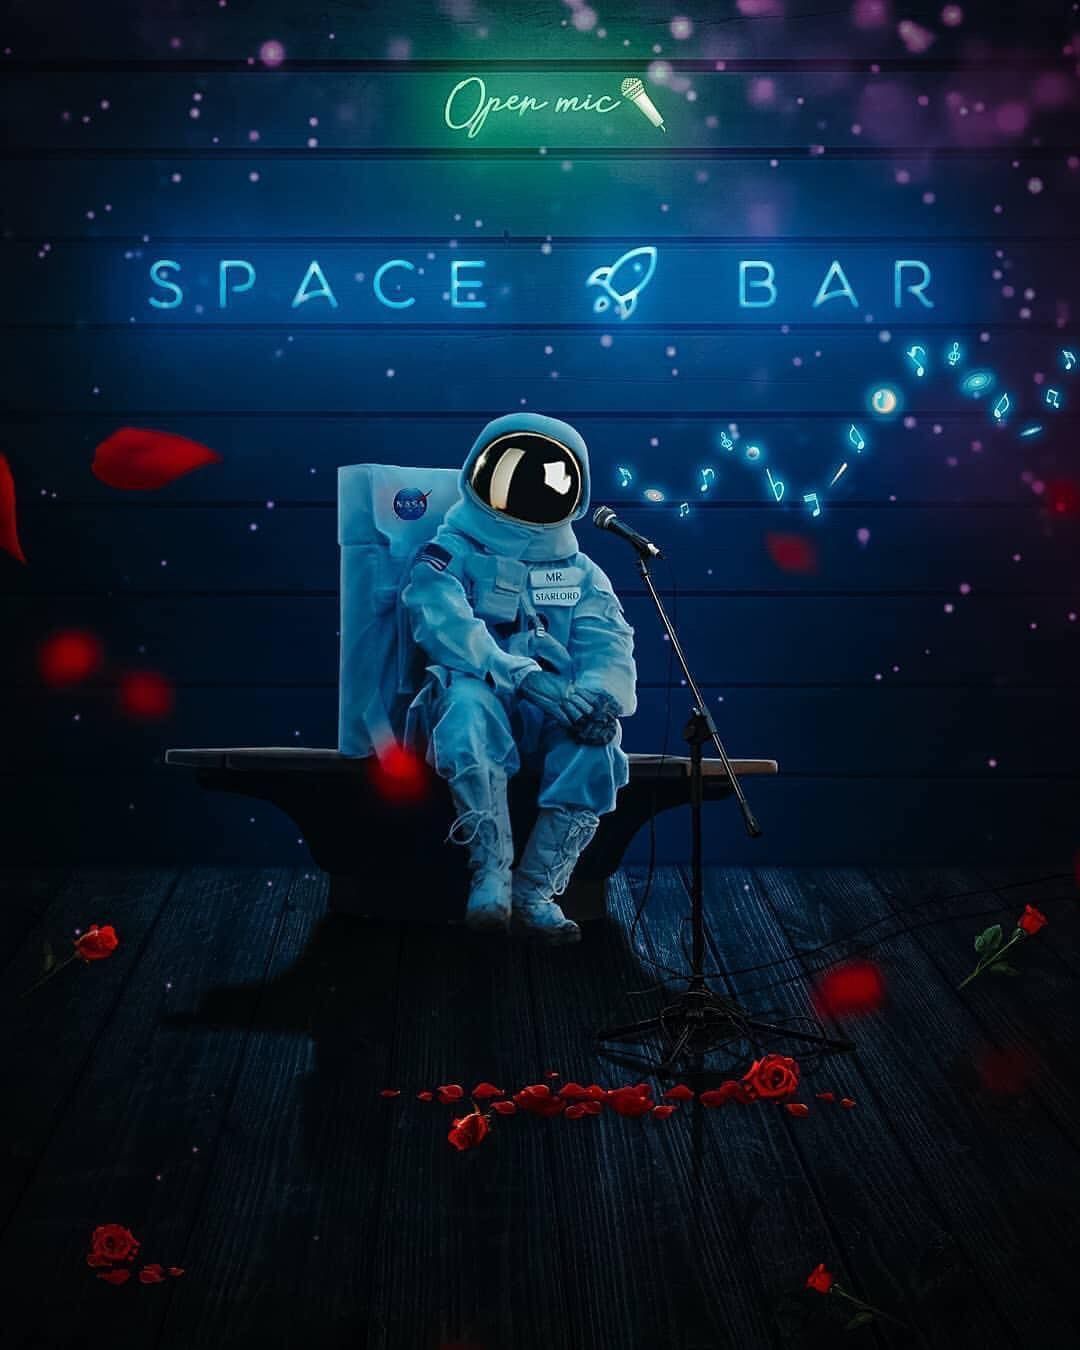 A space bar with an astronaut sitting on a bench - Astronaut